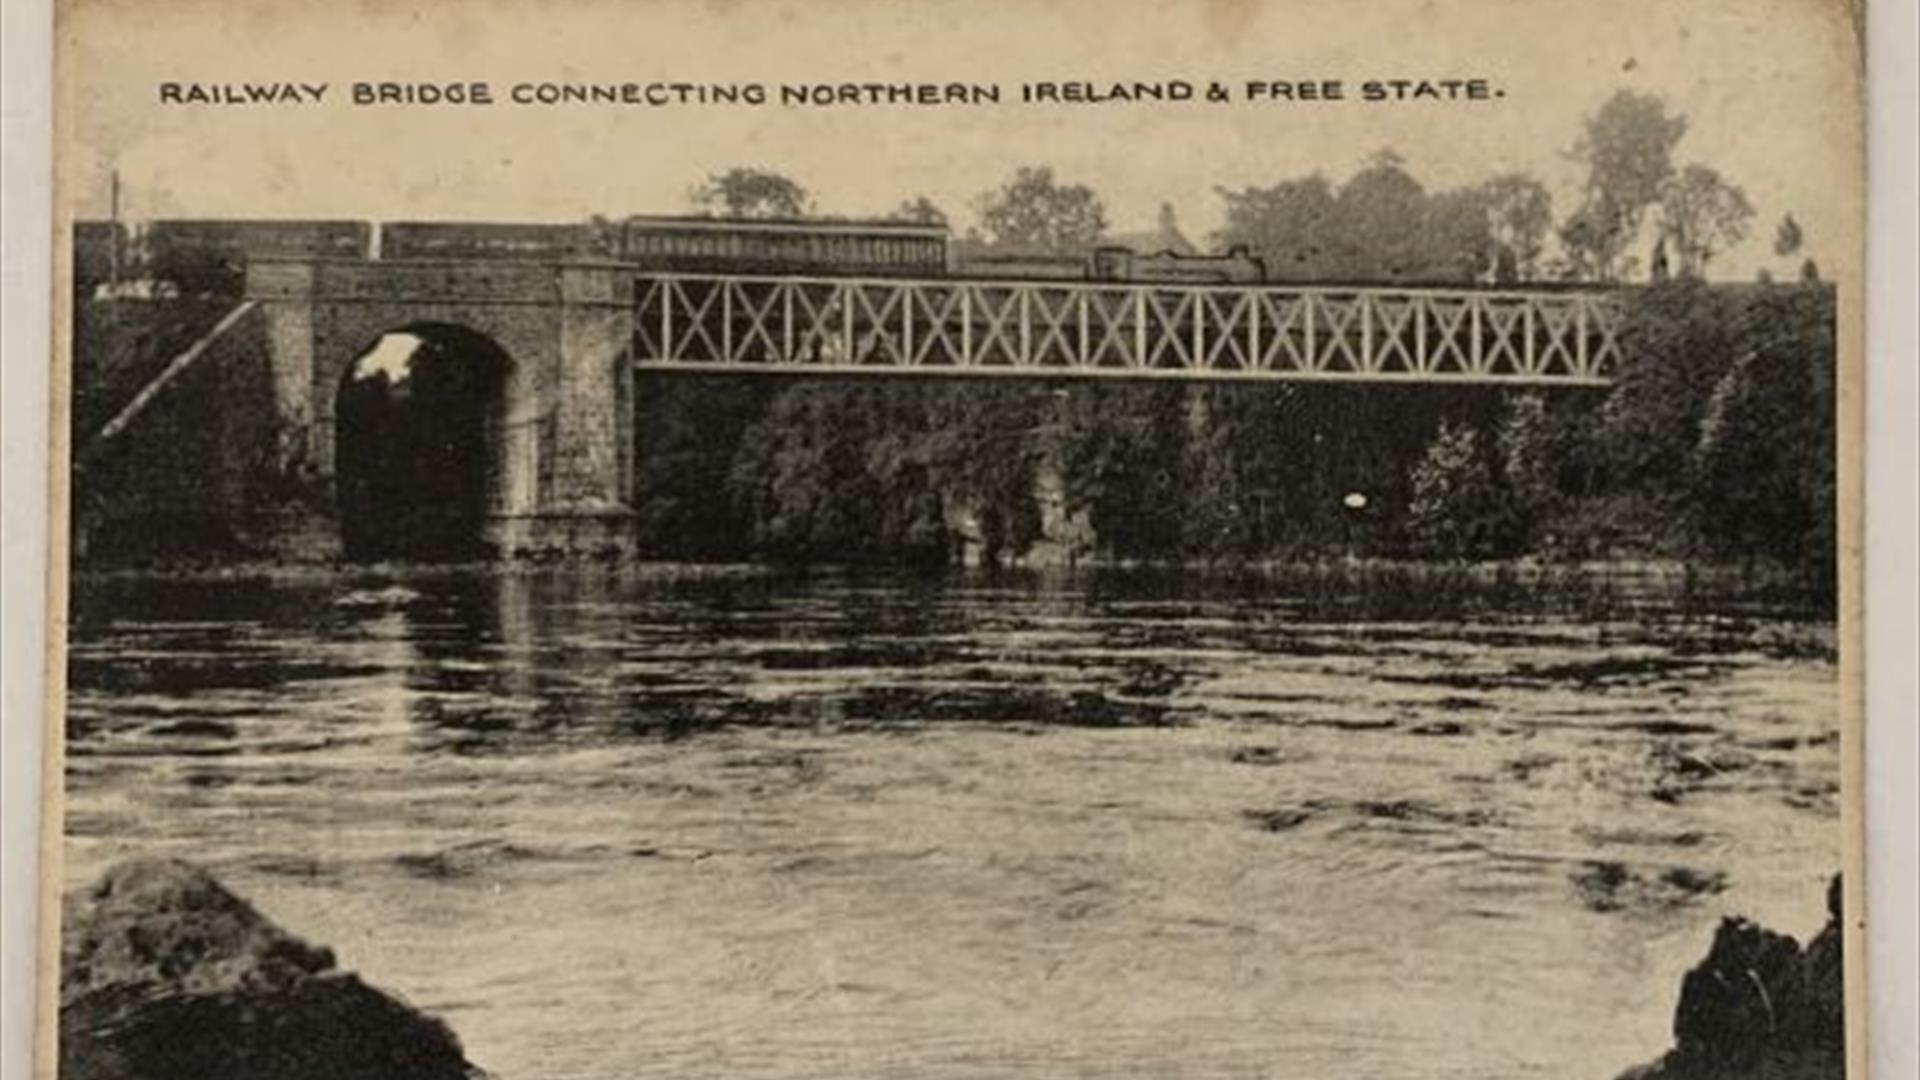 Postcard showing the viaduct in Belleek of the Enniskillen and Bundoran Railway Company. The bridge connected County Fermanagh to County Donegal on th